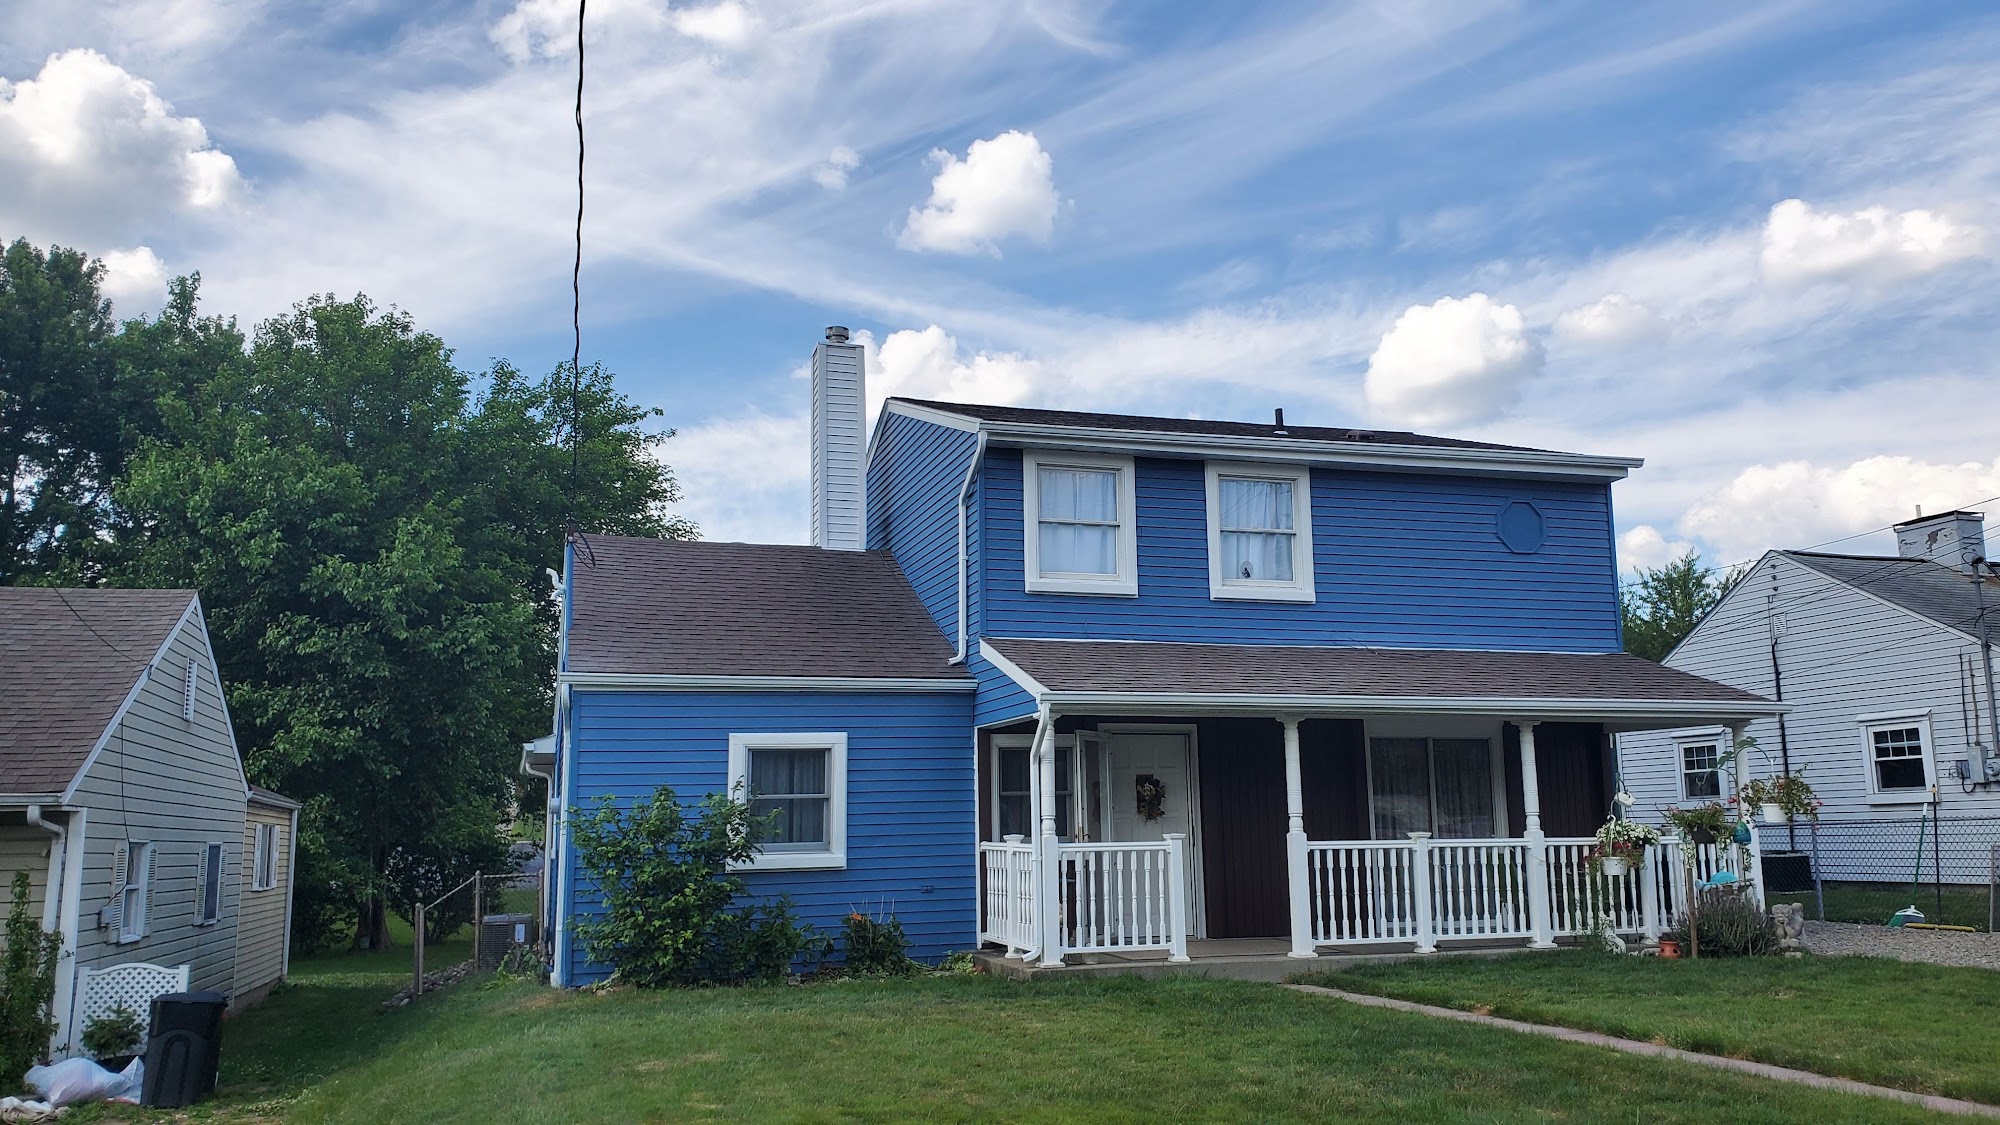 Kern Painting And Maintenance 20 Duquesne Ct, Springdale Pennsylvania 15144